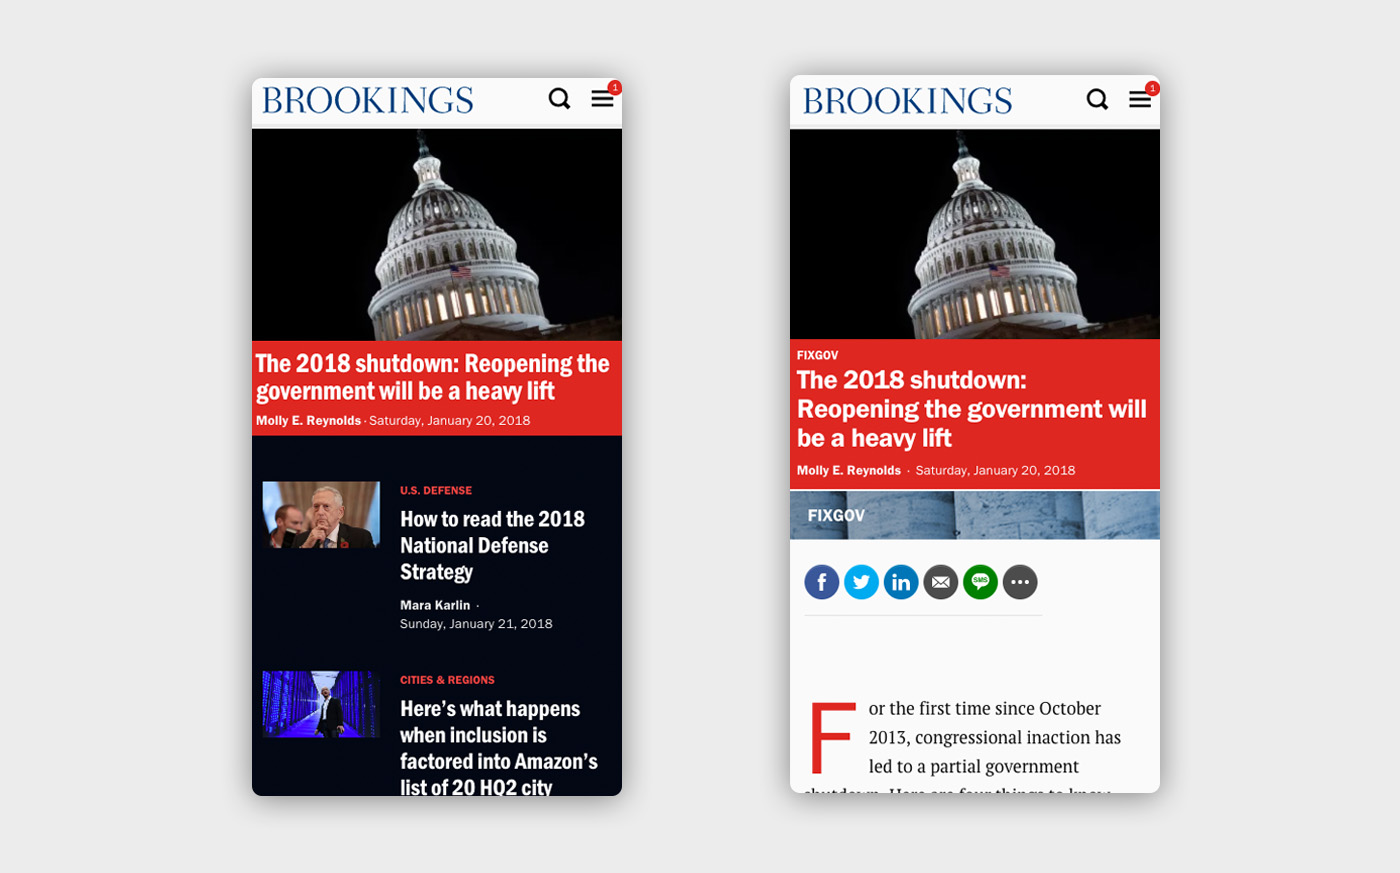 Mobile views of the Brookings site - on the left, the home page with images and headlines, and on the right a single article view also with an image and headline in red